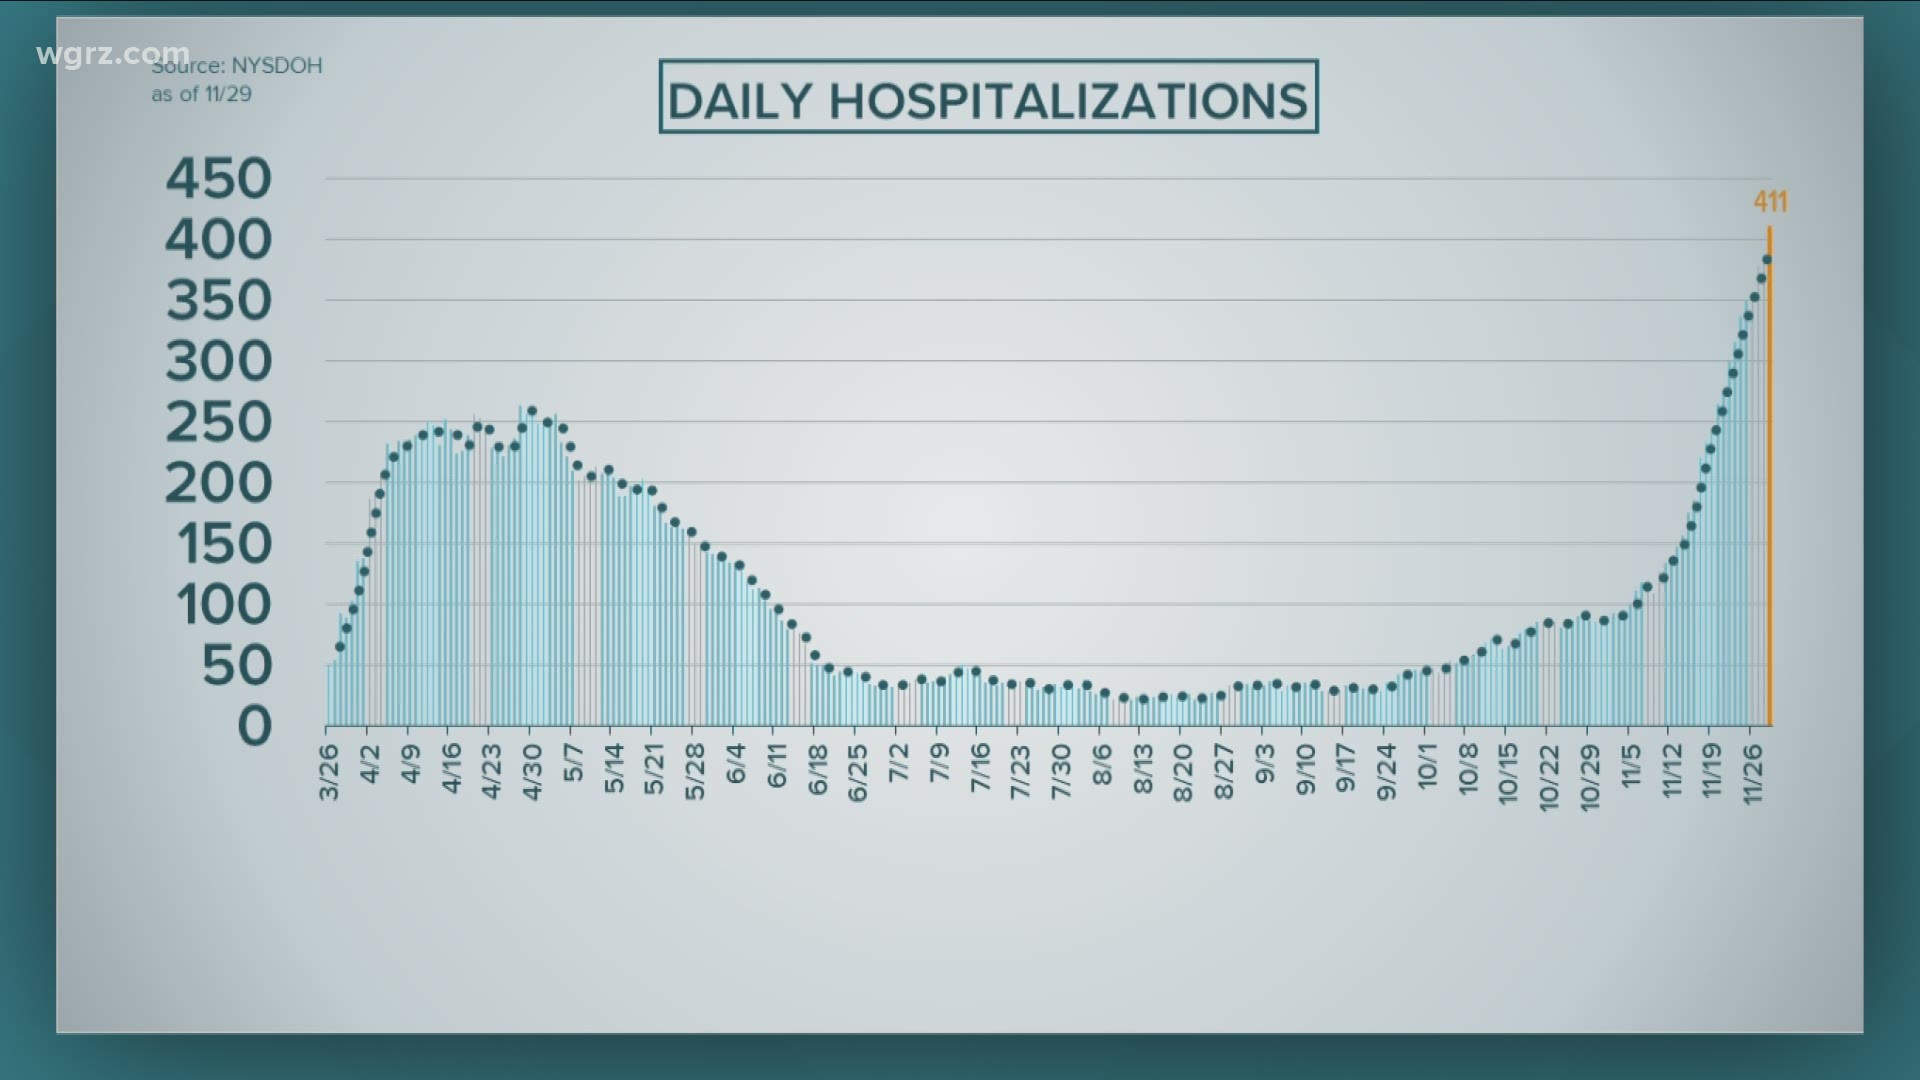 One of the biggest reasons that the state is trying to change strategies is because hospitalizations just keep rising to record-highs.